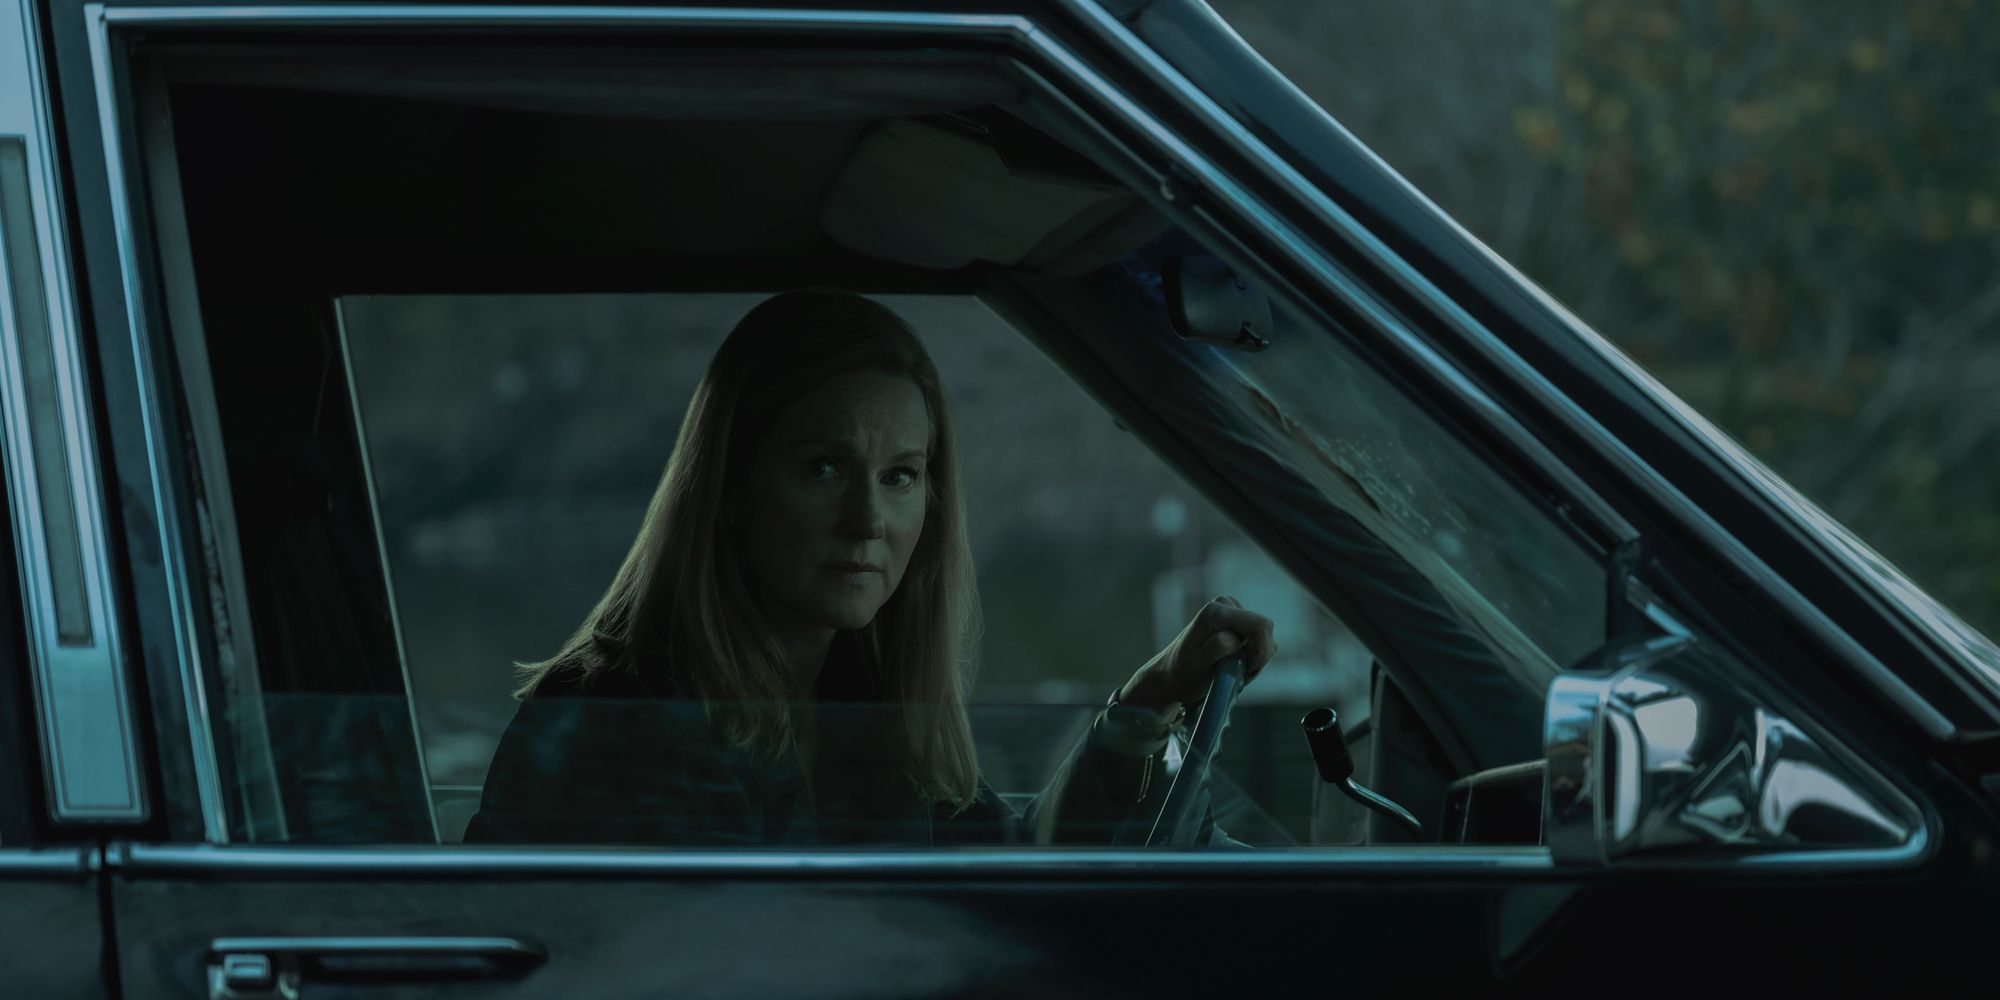 Ozark Season 2 Review: A Less Dour Season Gets Down To The Business Of Crime